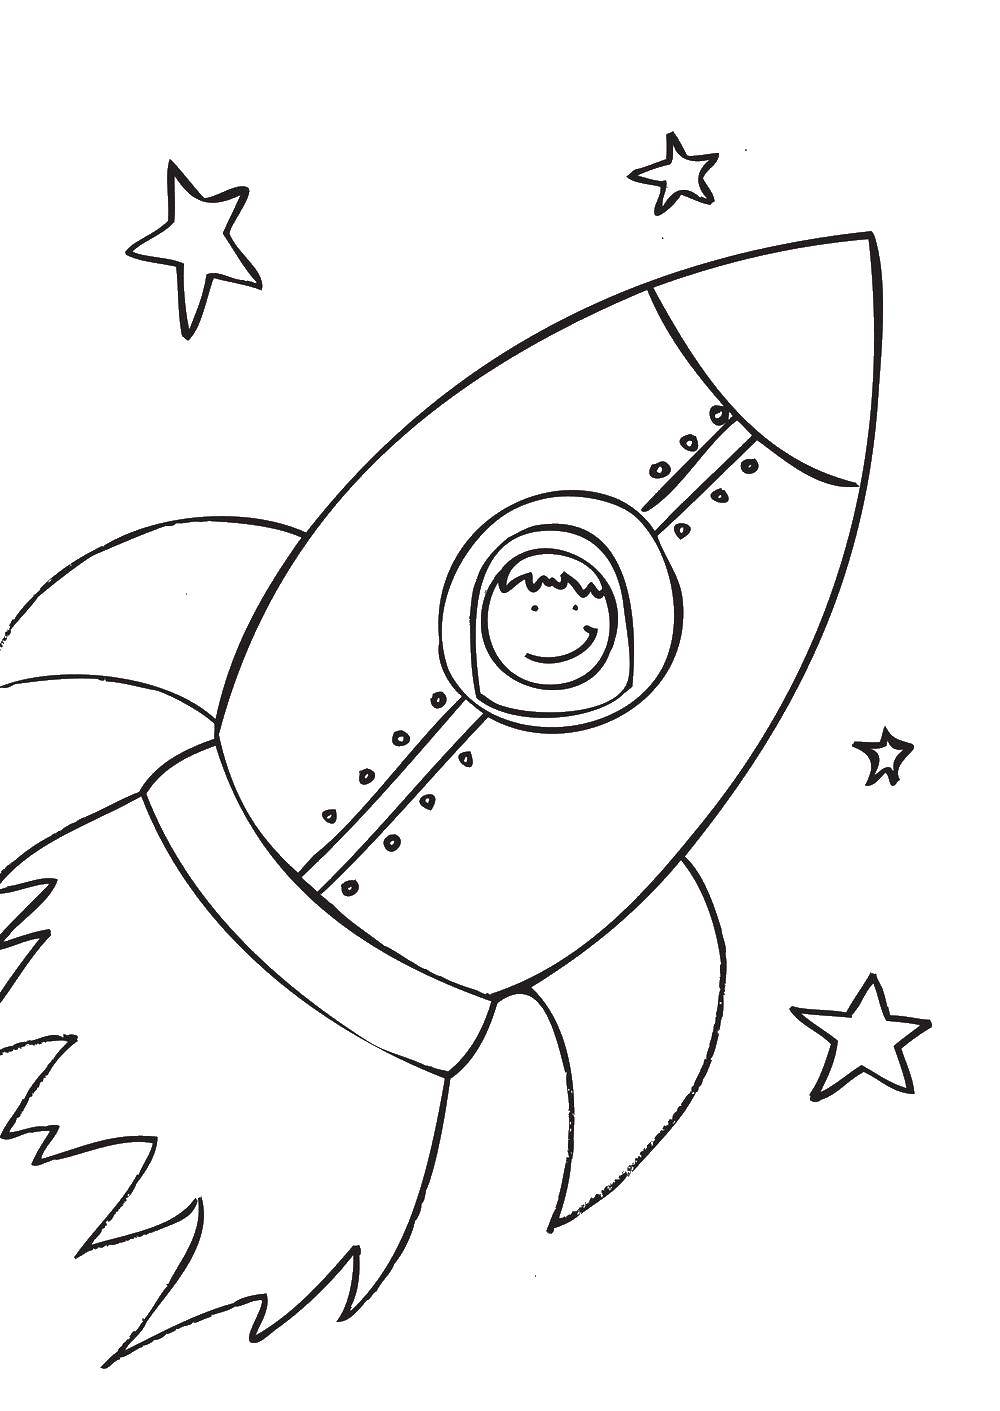 Coloring The astronaut in the rocket. Category rockets. Tags:  rocket, space, astronaut.